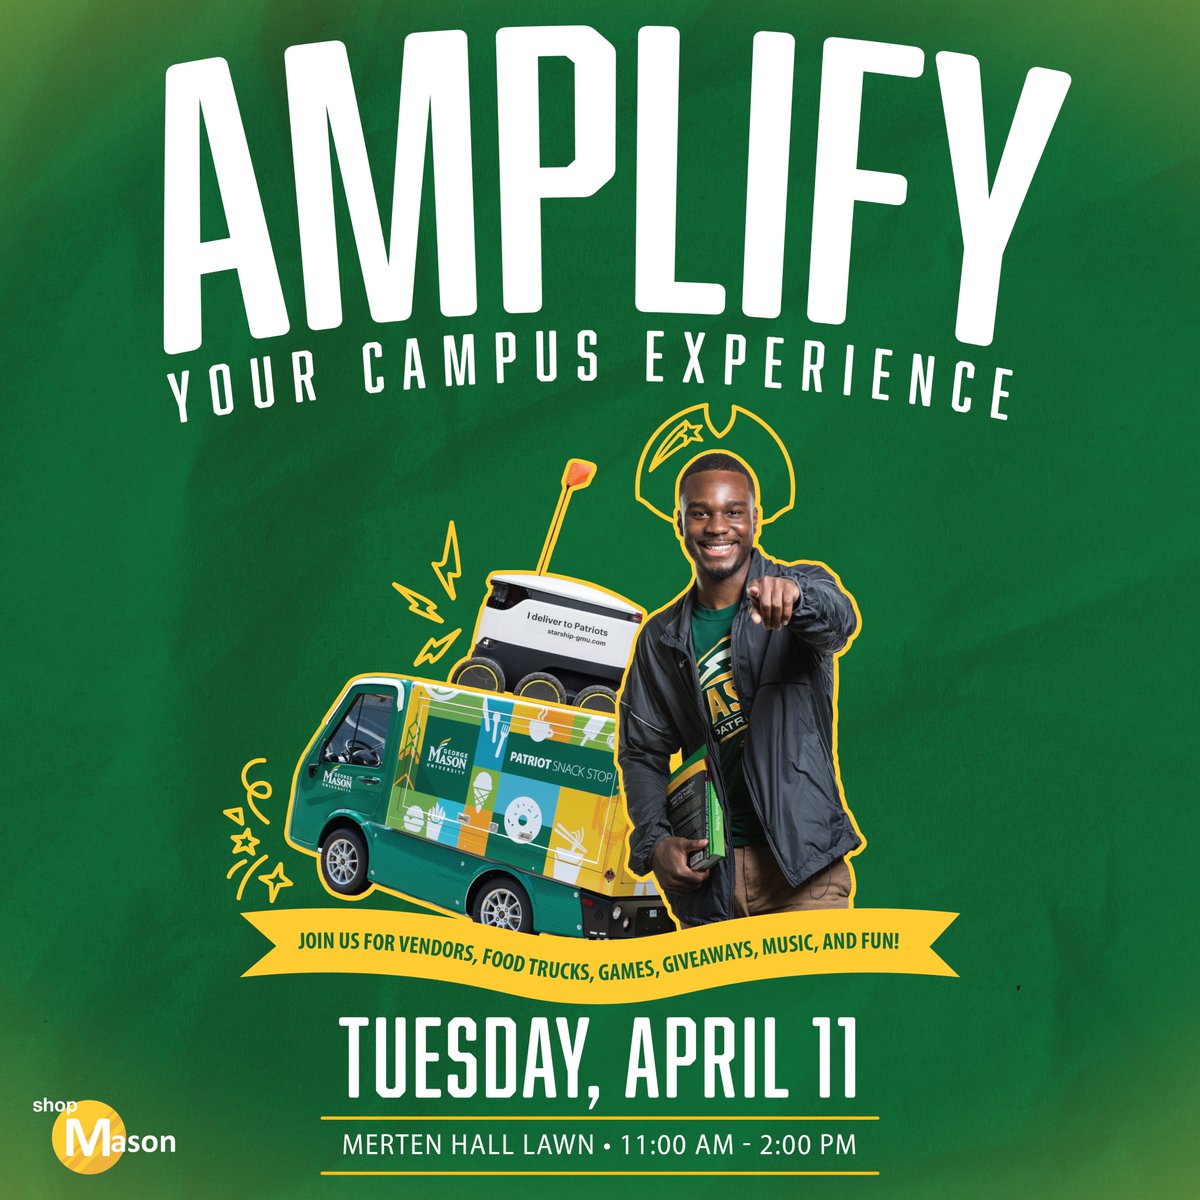 AMPLIFY your campus experience with samples from #MasonMerchants and #PatriotPerks on April 11th at Merten Hall. There will be food trucks, music, giveaways, and more!

RSVP on @shopMason 's link in their bio for a chance to win a bonus prize
#MasonNation #gmu